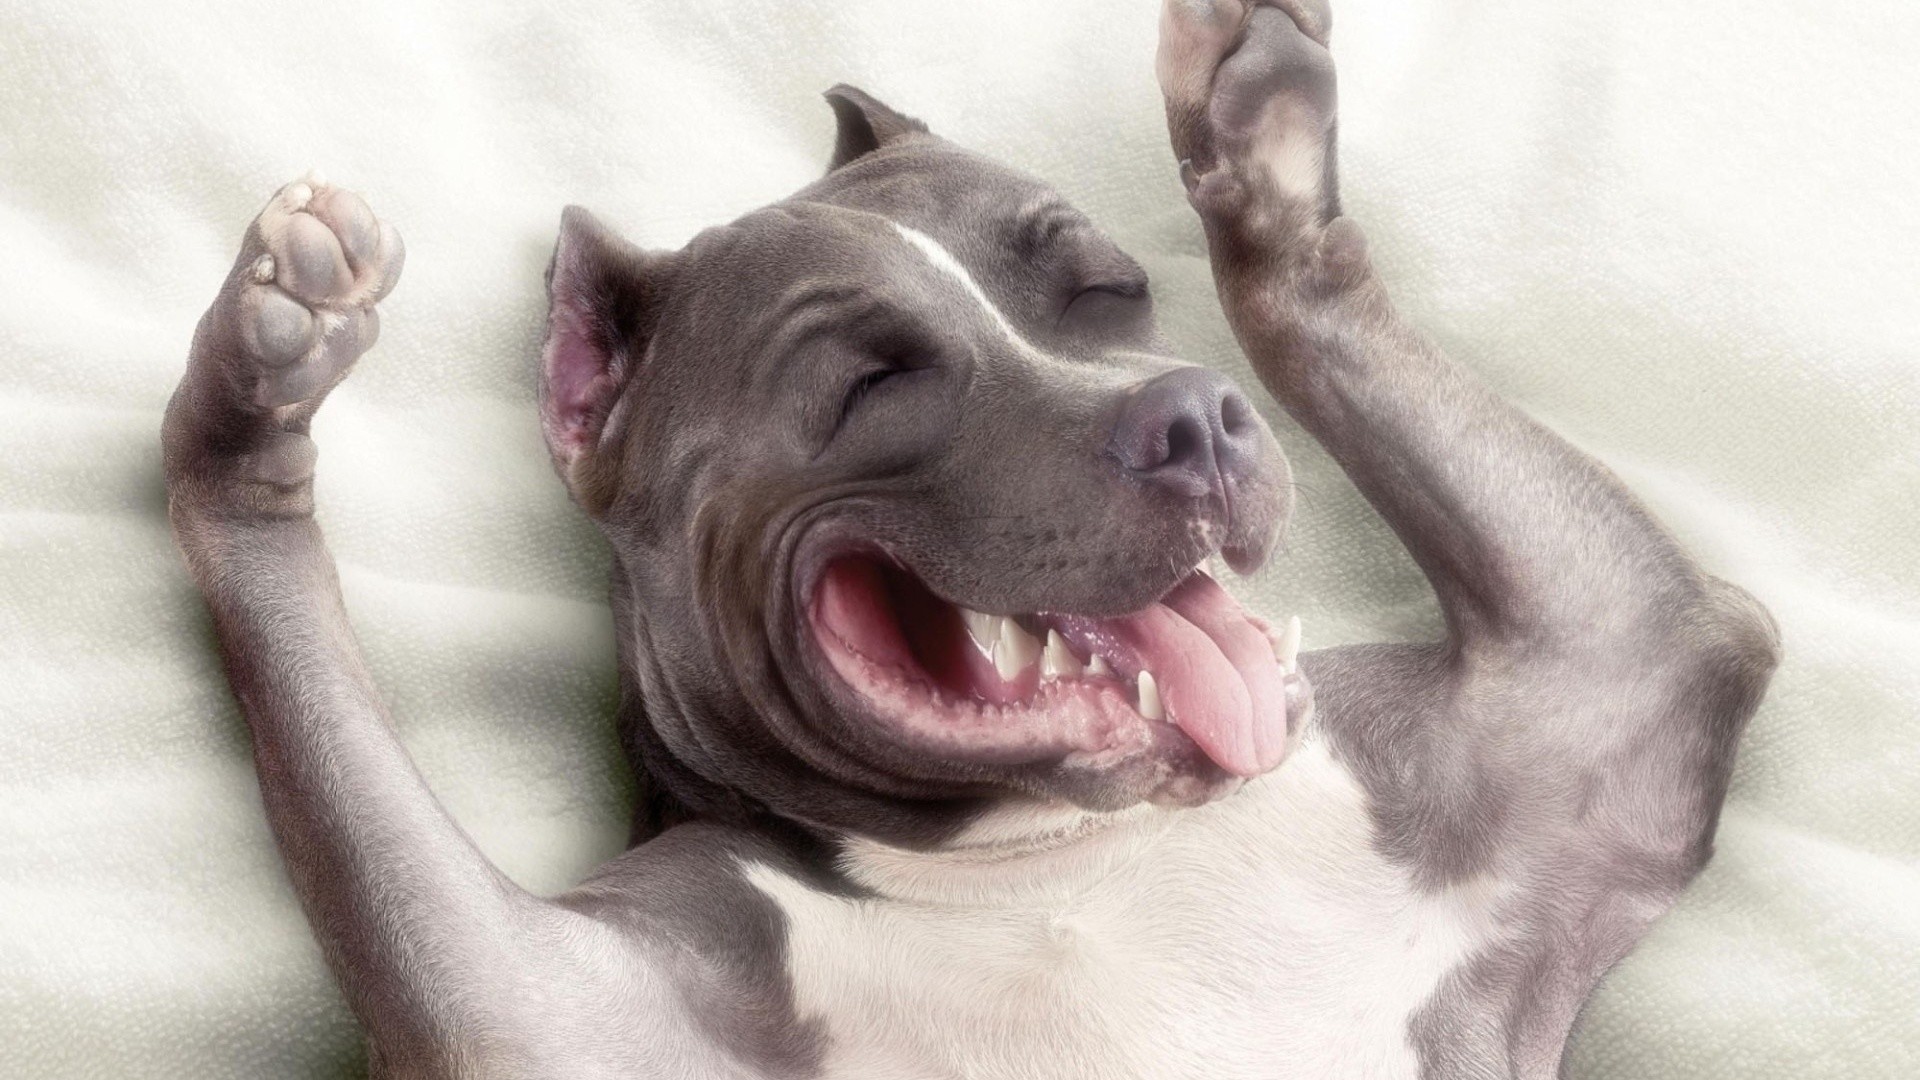 1920x1080 Pitbull Dog New Wallpapers | Pitbull Dog Pictures |